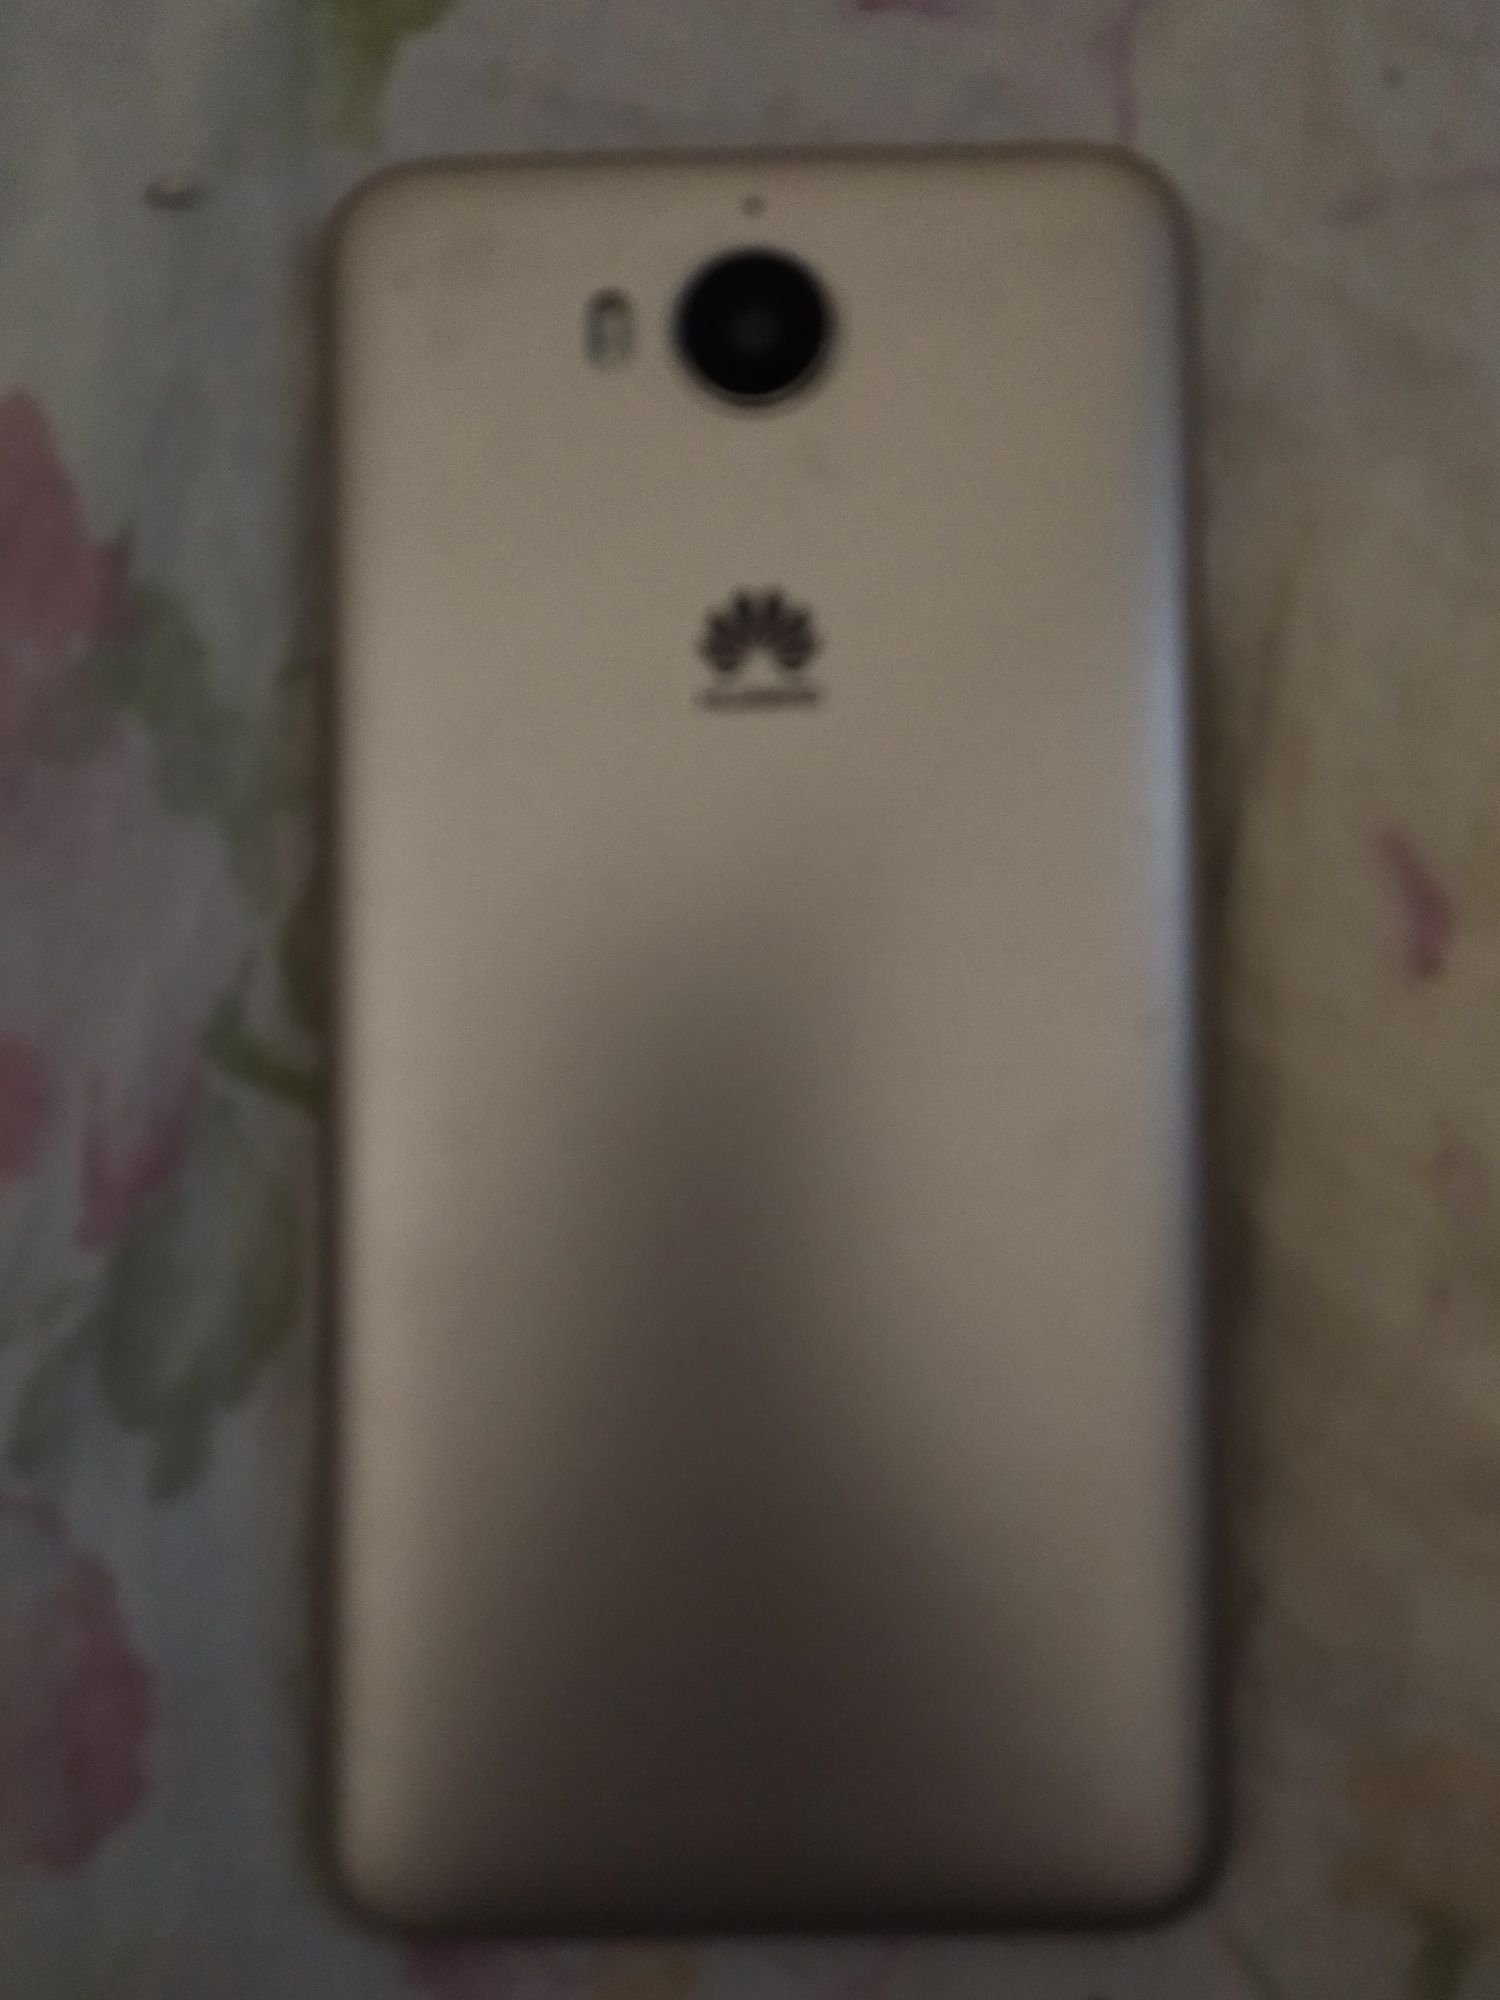 HUAWEI Y5 Android 6.0